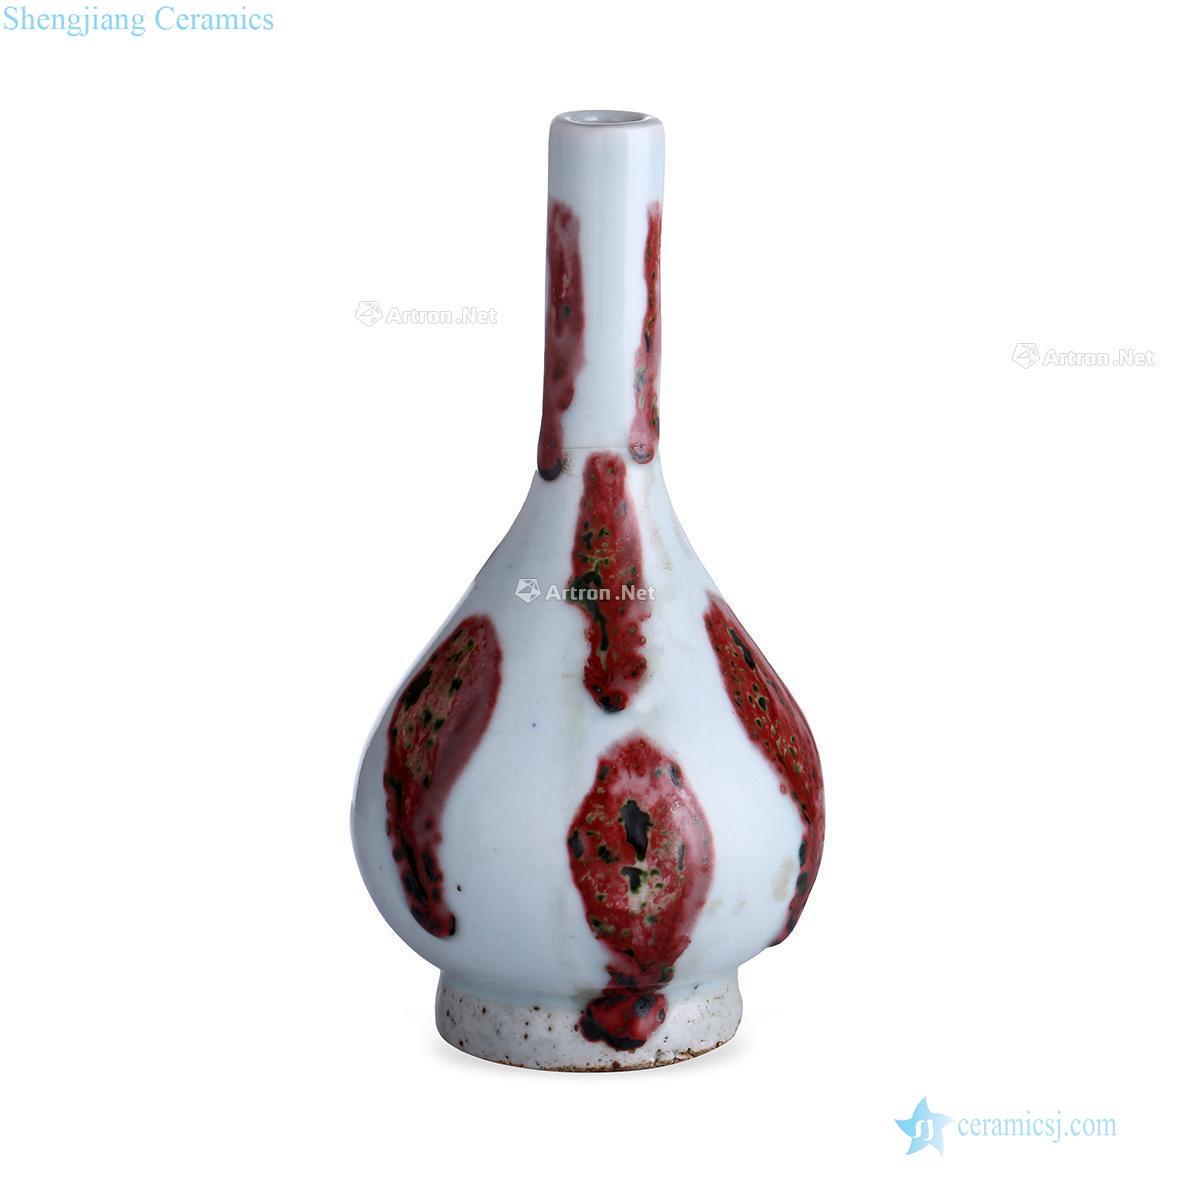 The yuan dynasty Youligong red lead bottle